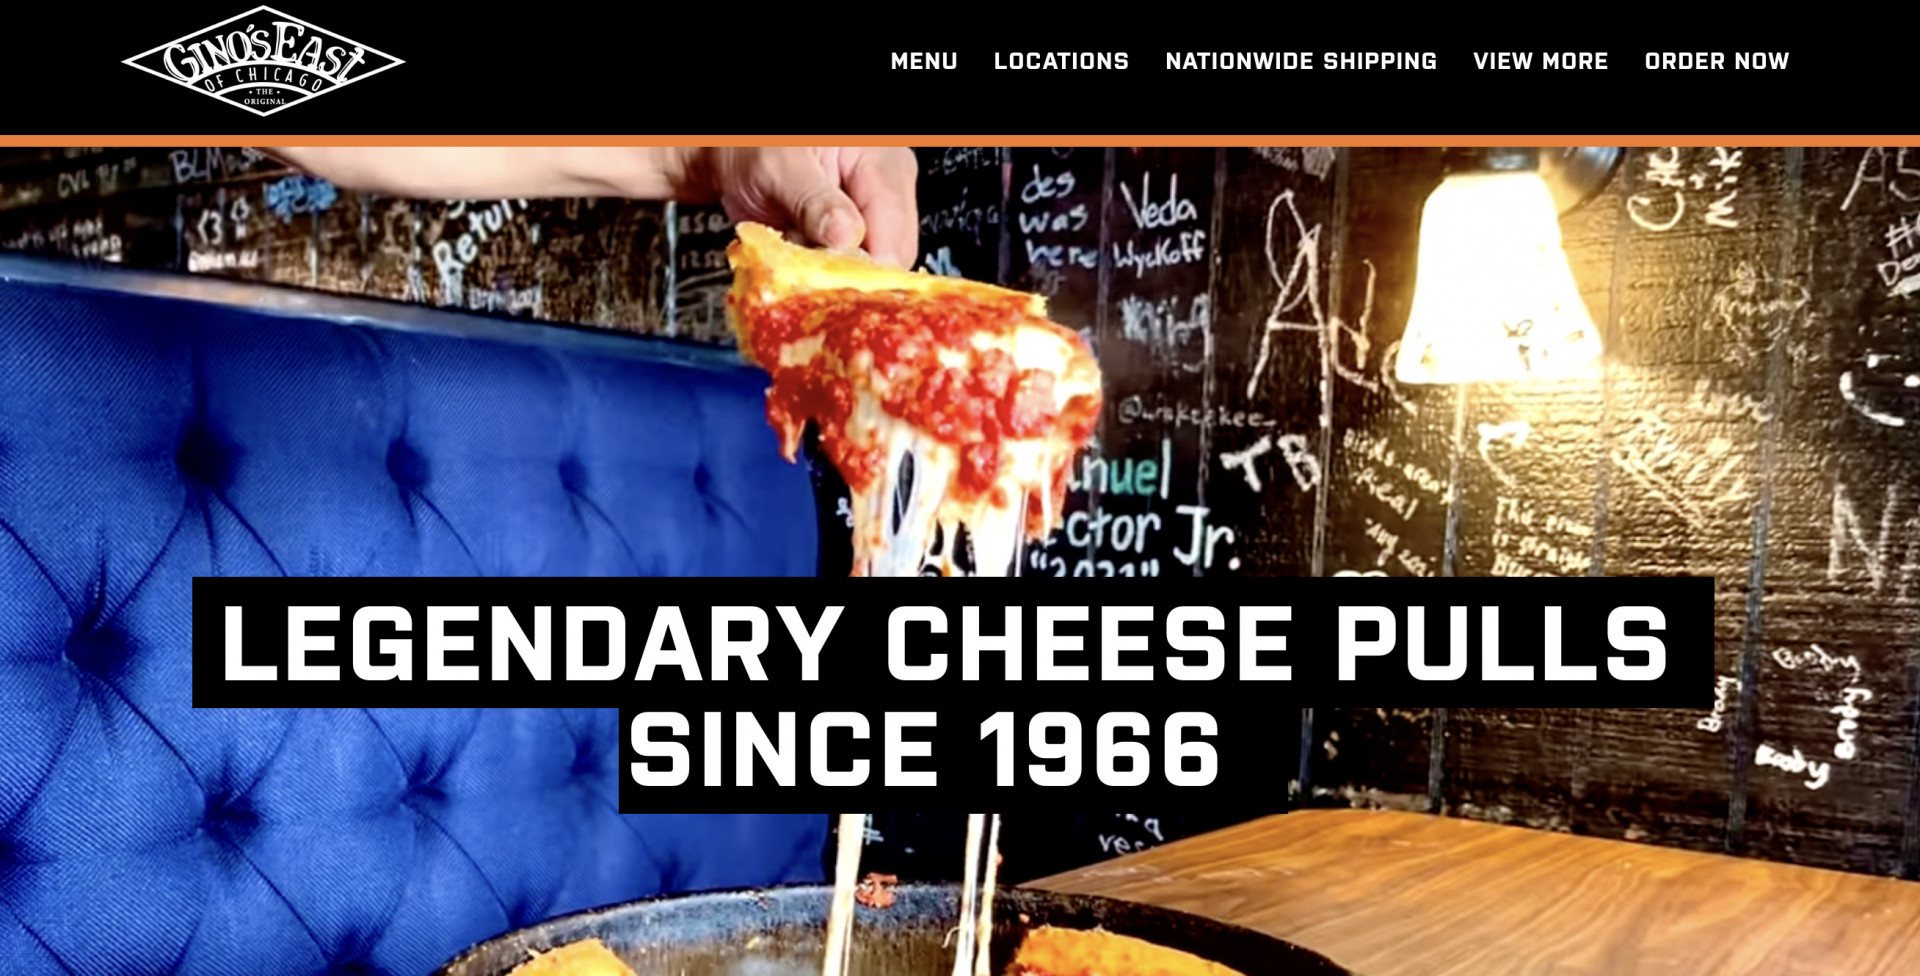 pizza website template example Gino’s East